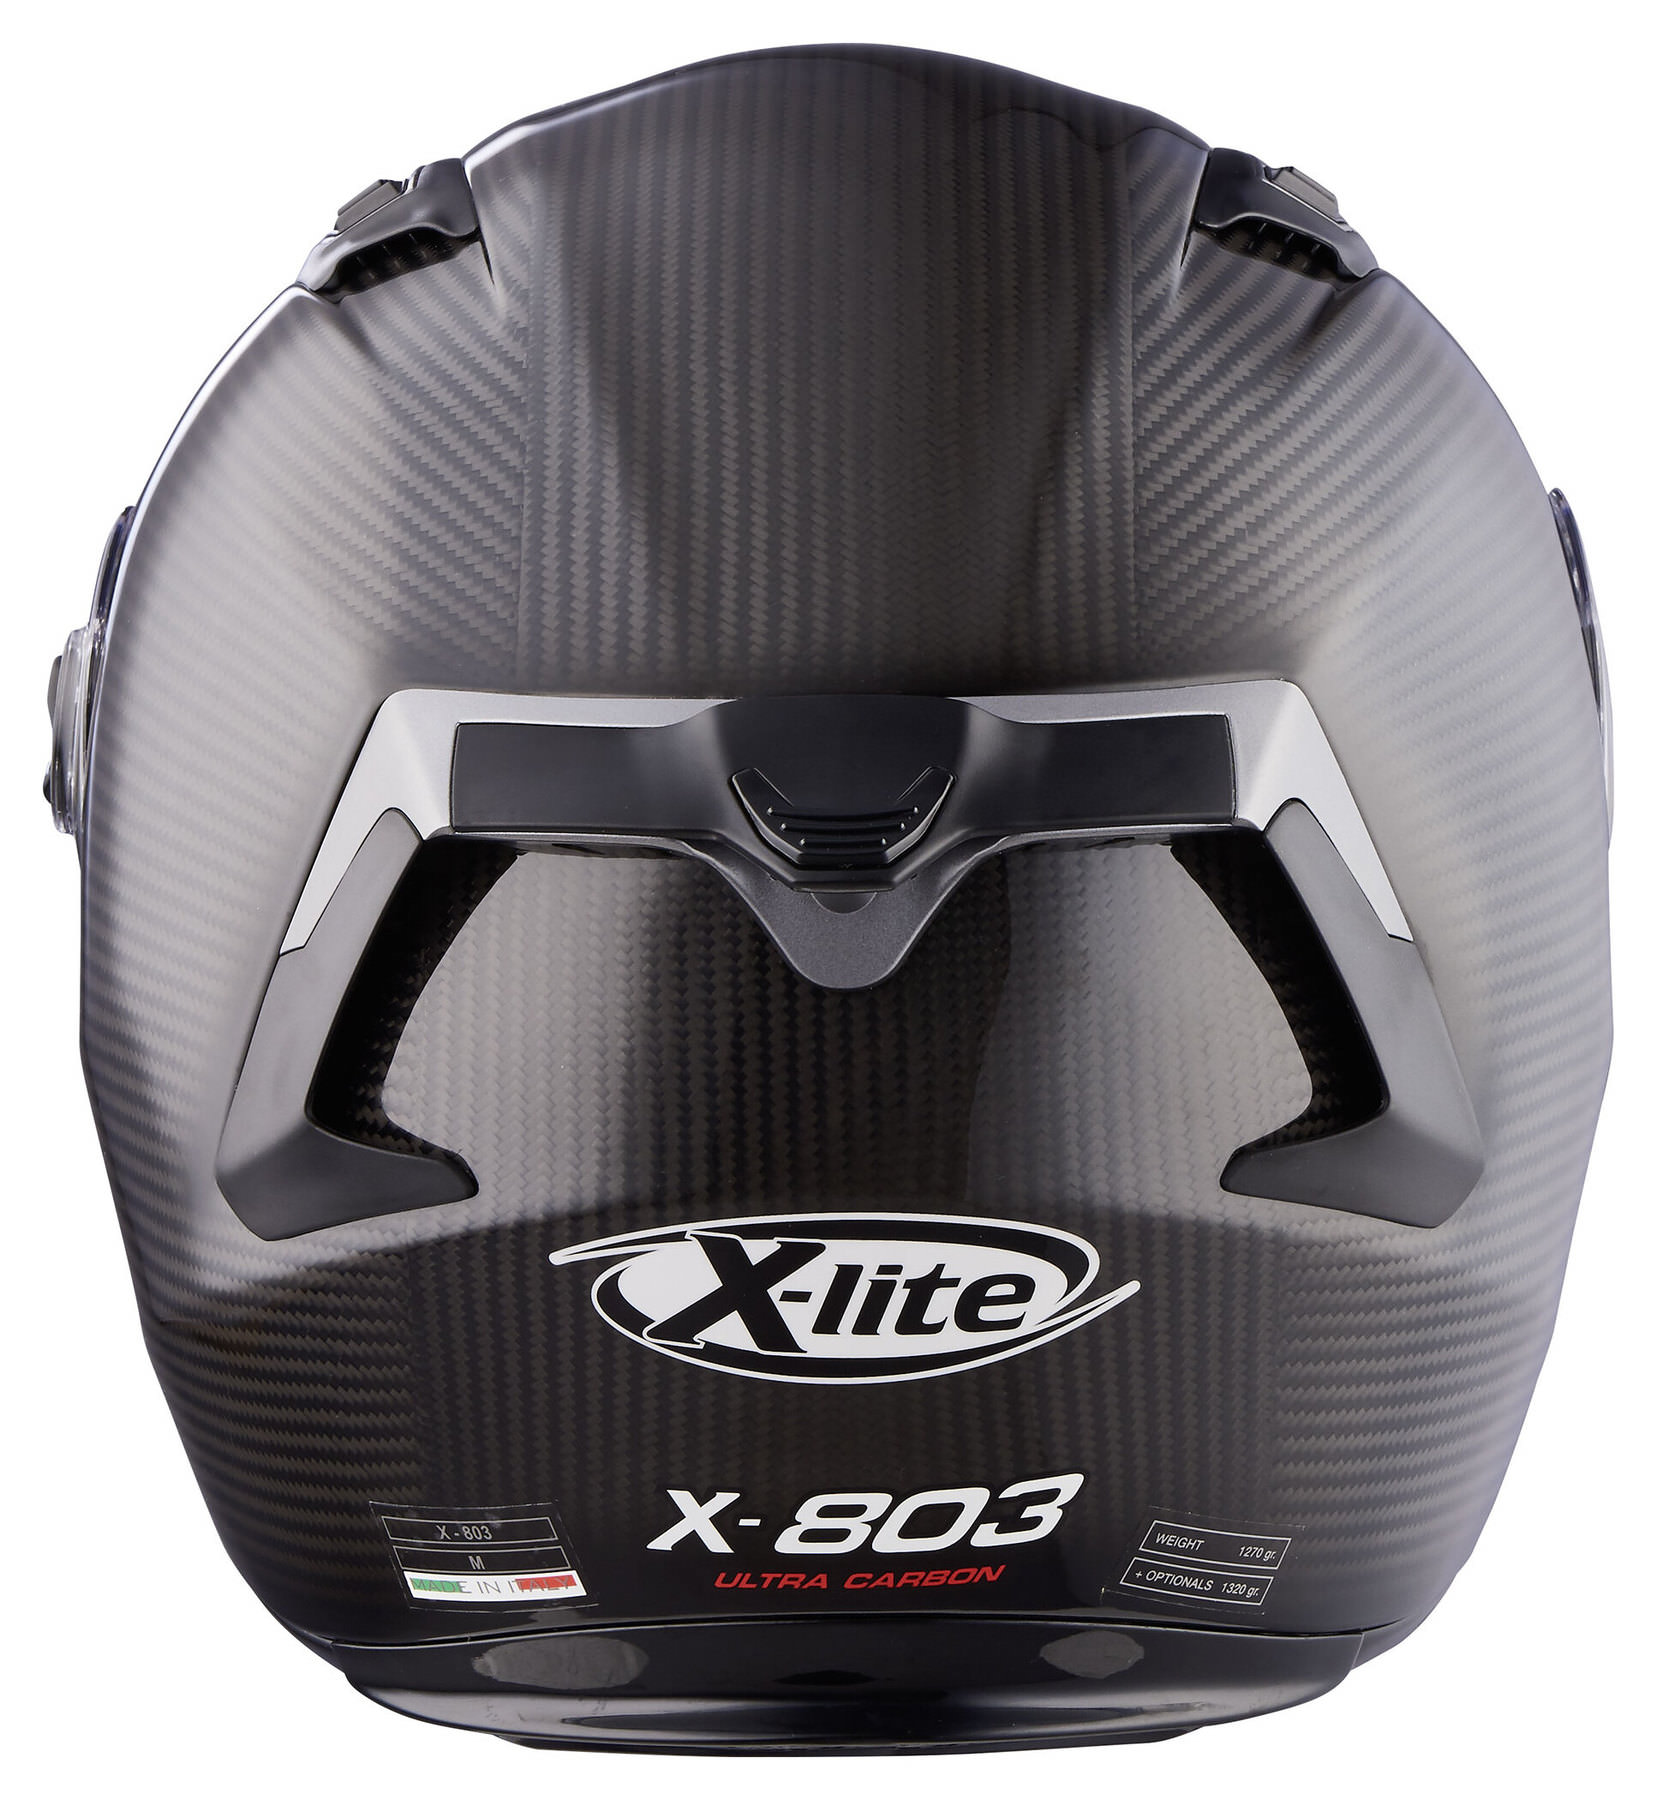 Buy X-lite X-803 Ultra Carbon Puro Carbon Full-Face Helmet | Louis motorcycle clothing and